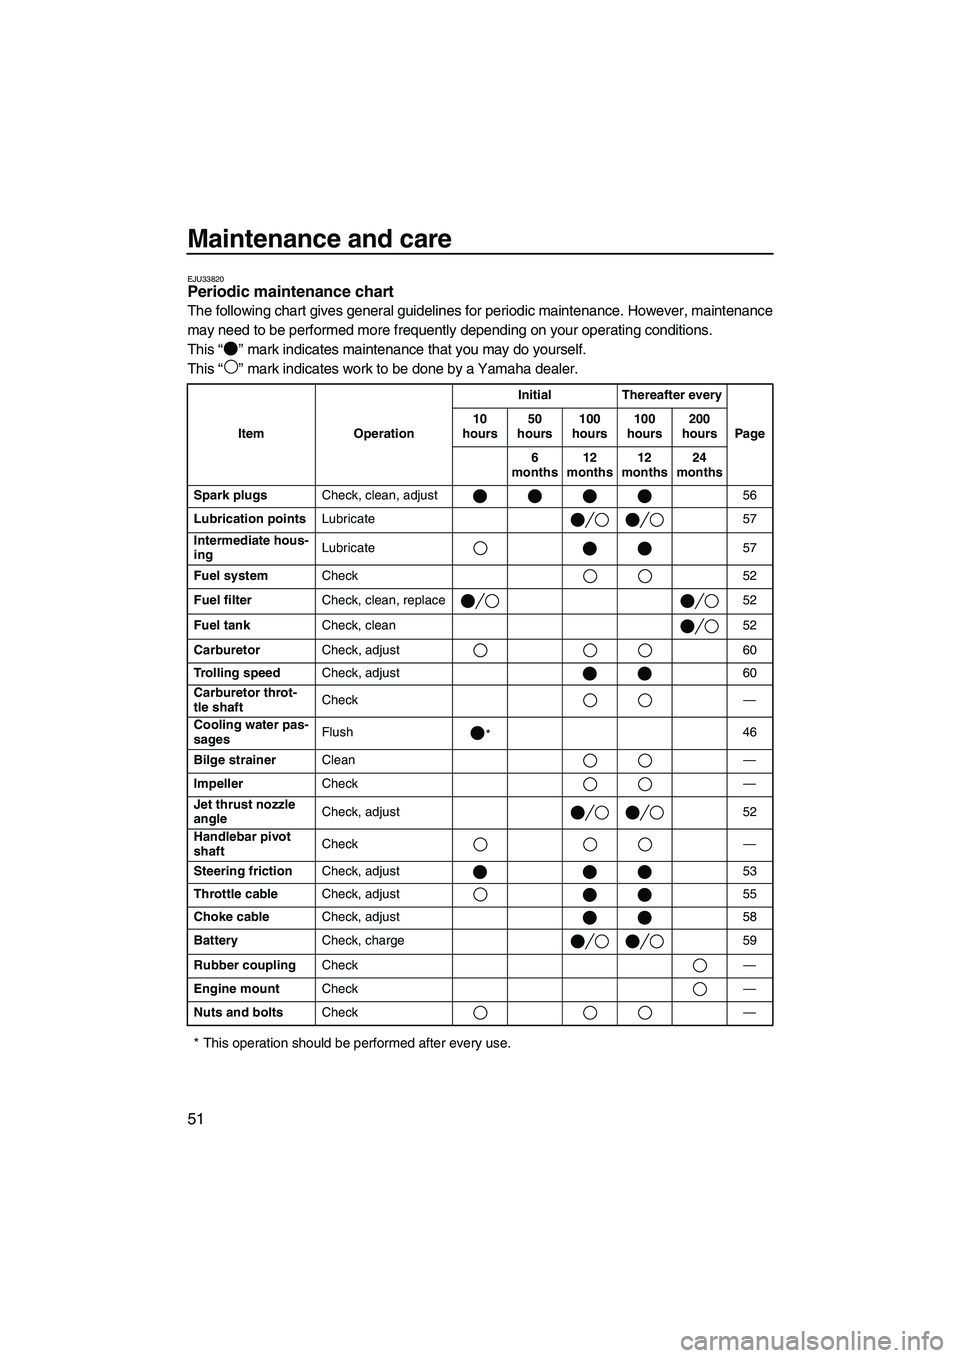 YAMAHA SUPERJET 2007 Owners Guide Maintenance and care
51
EJU33820Periodic maintenance chart 
The following chart gives general guidelines for periodic maintenance. However, maintenance
may need to be performed more frequently dependi